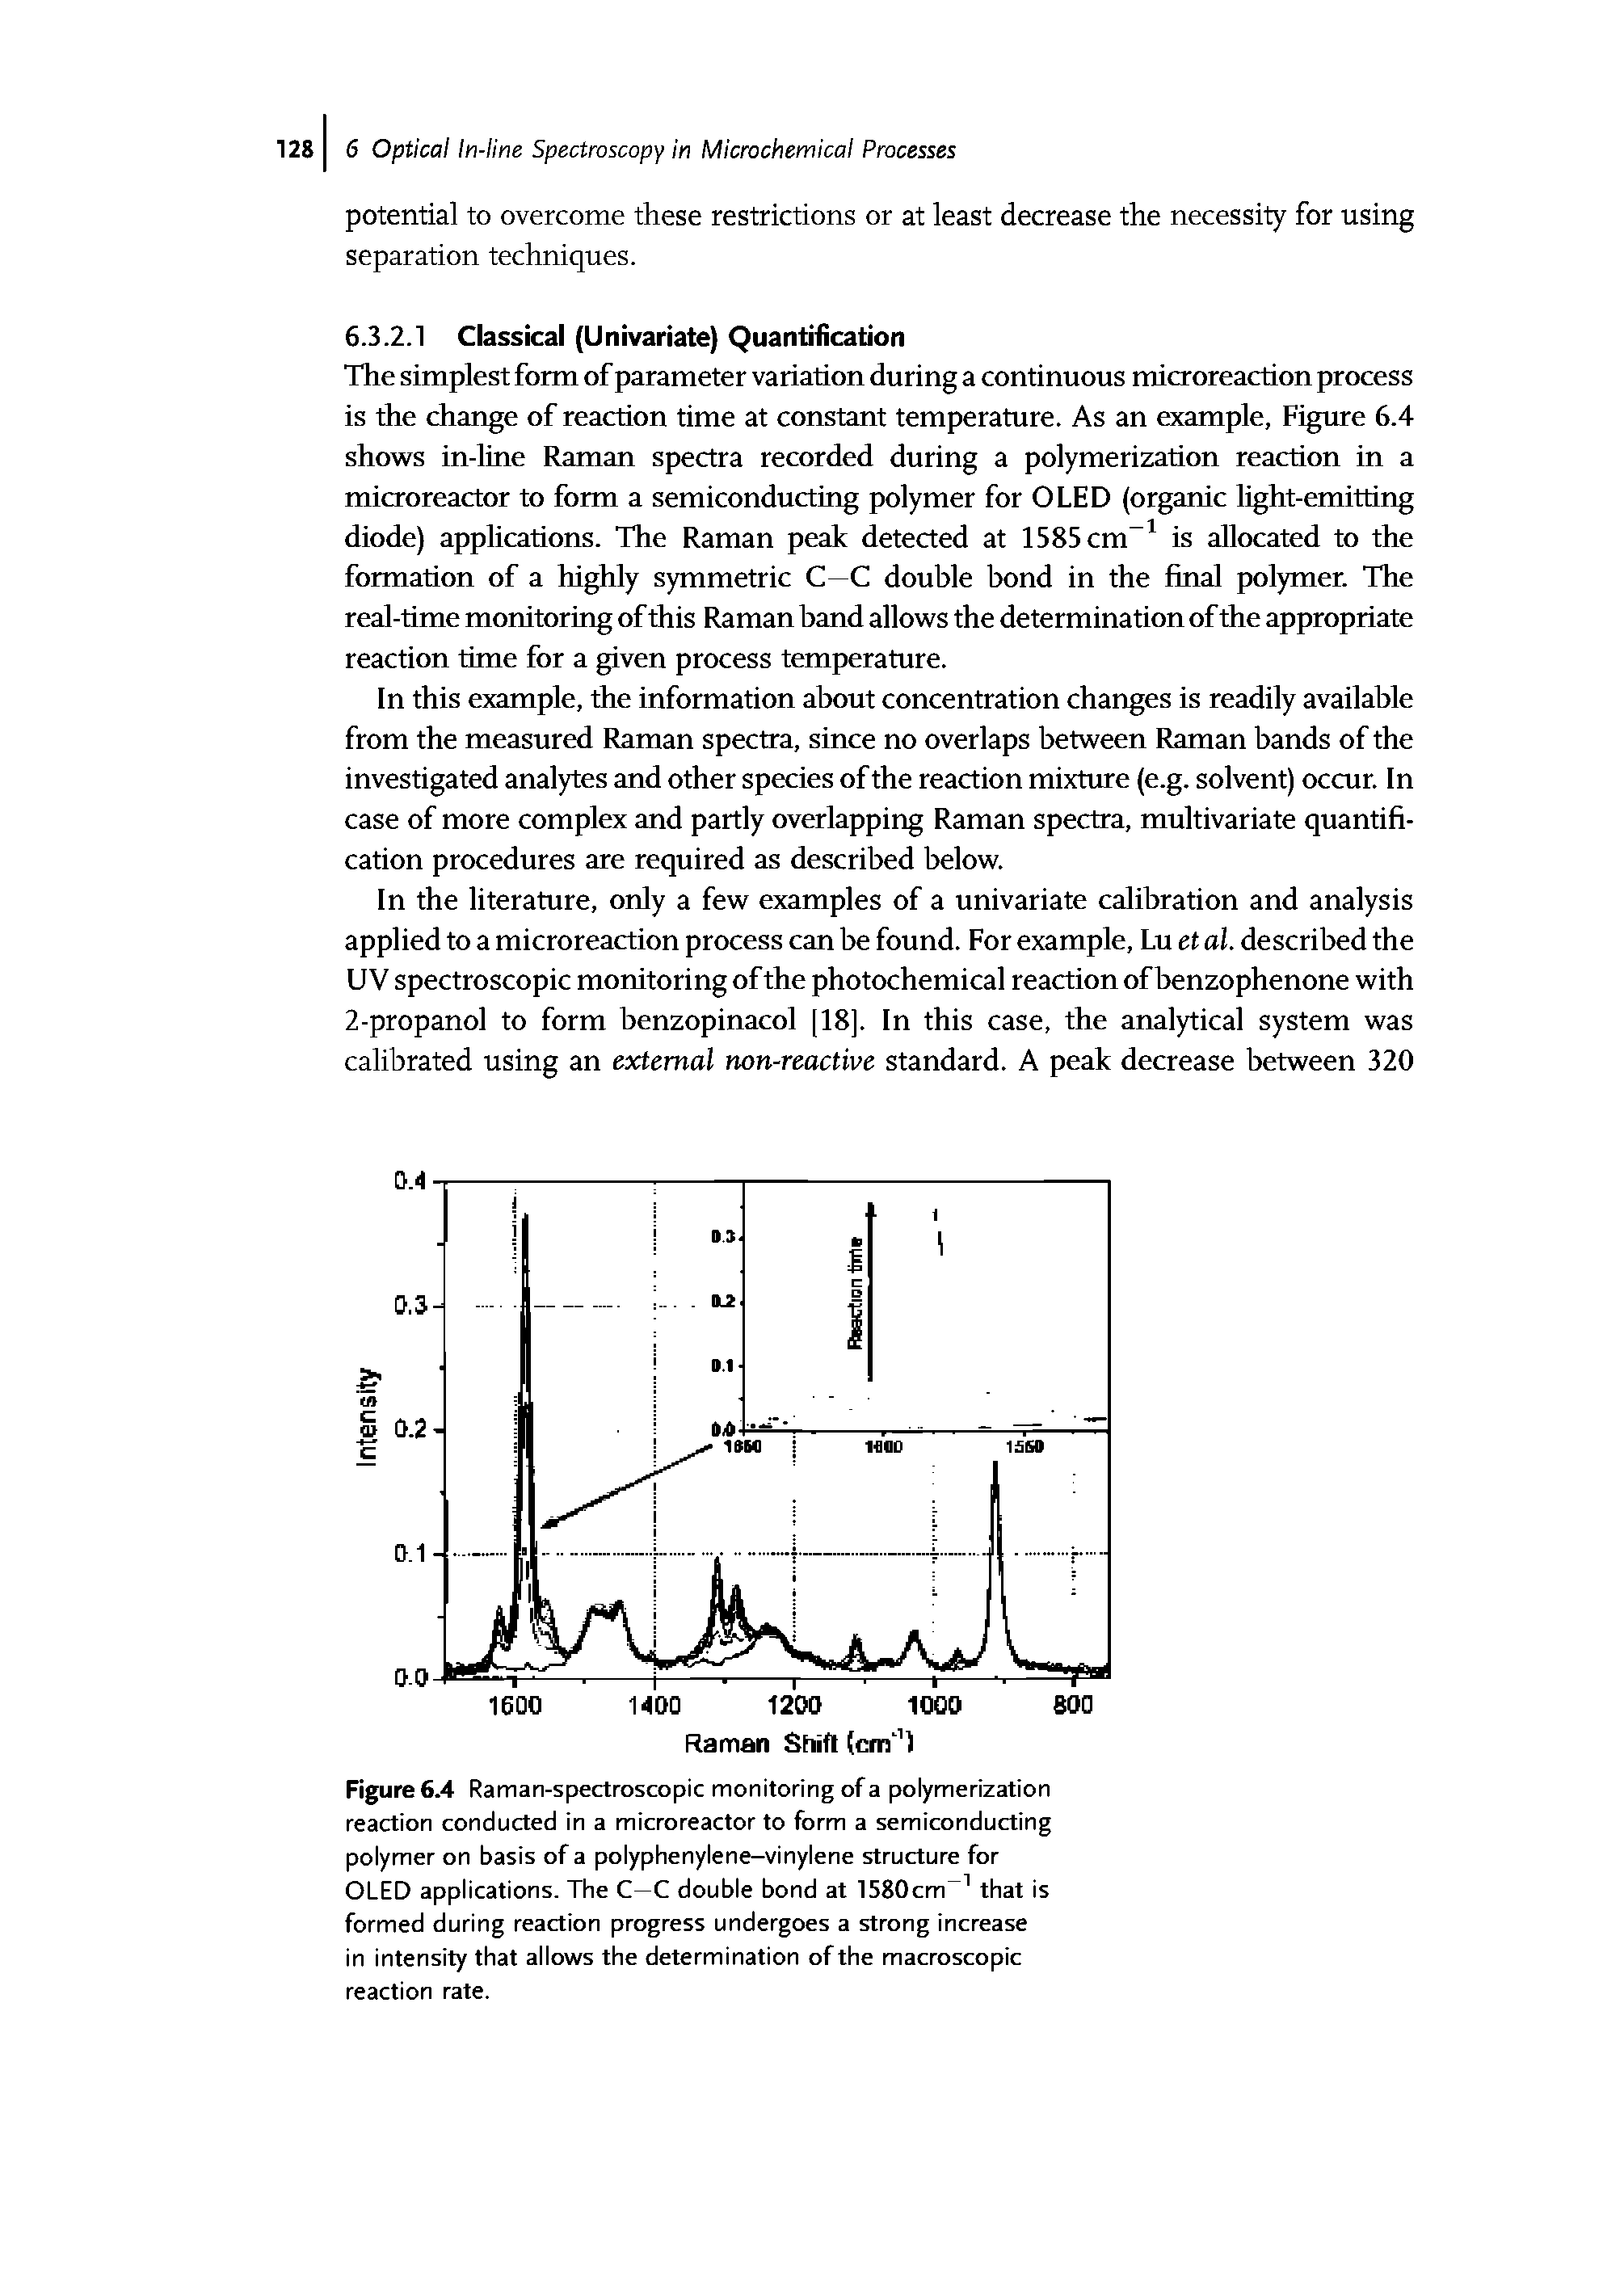 Figure 6.4 Raman-spectroscopic monitoring of a polymerization reaction conducted in a microreactor to form a semiconducting polymer on basis of a polyphenylene-vinylene structure for OLED applications. The C—C double bond at 1580cm that is formed during reaction progress undergoes a strong increase in intensity that allows the determination of the macroscopic reaction rate.